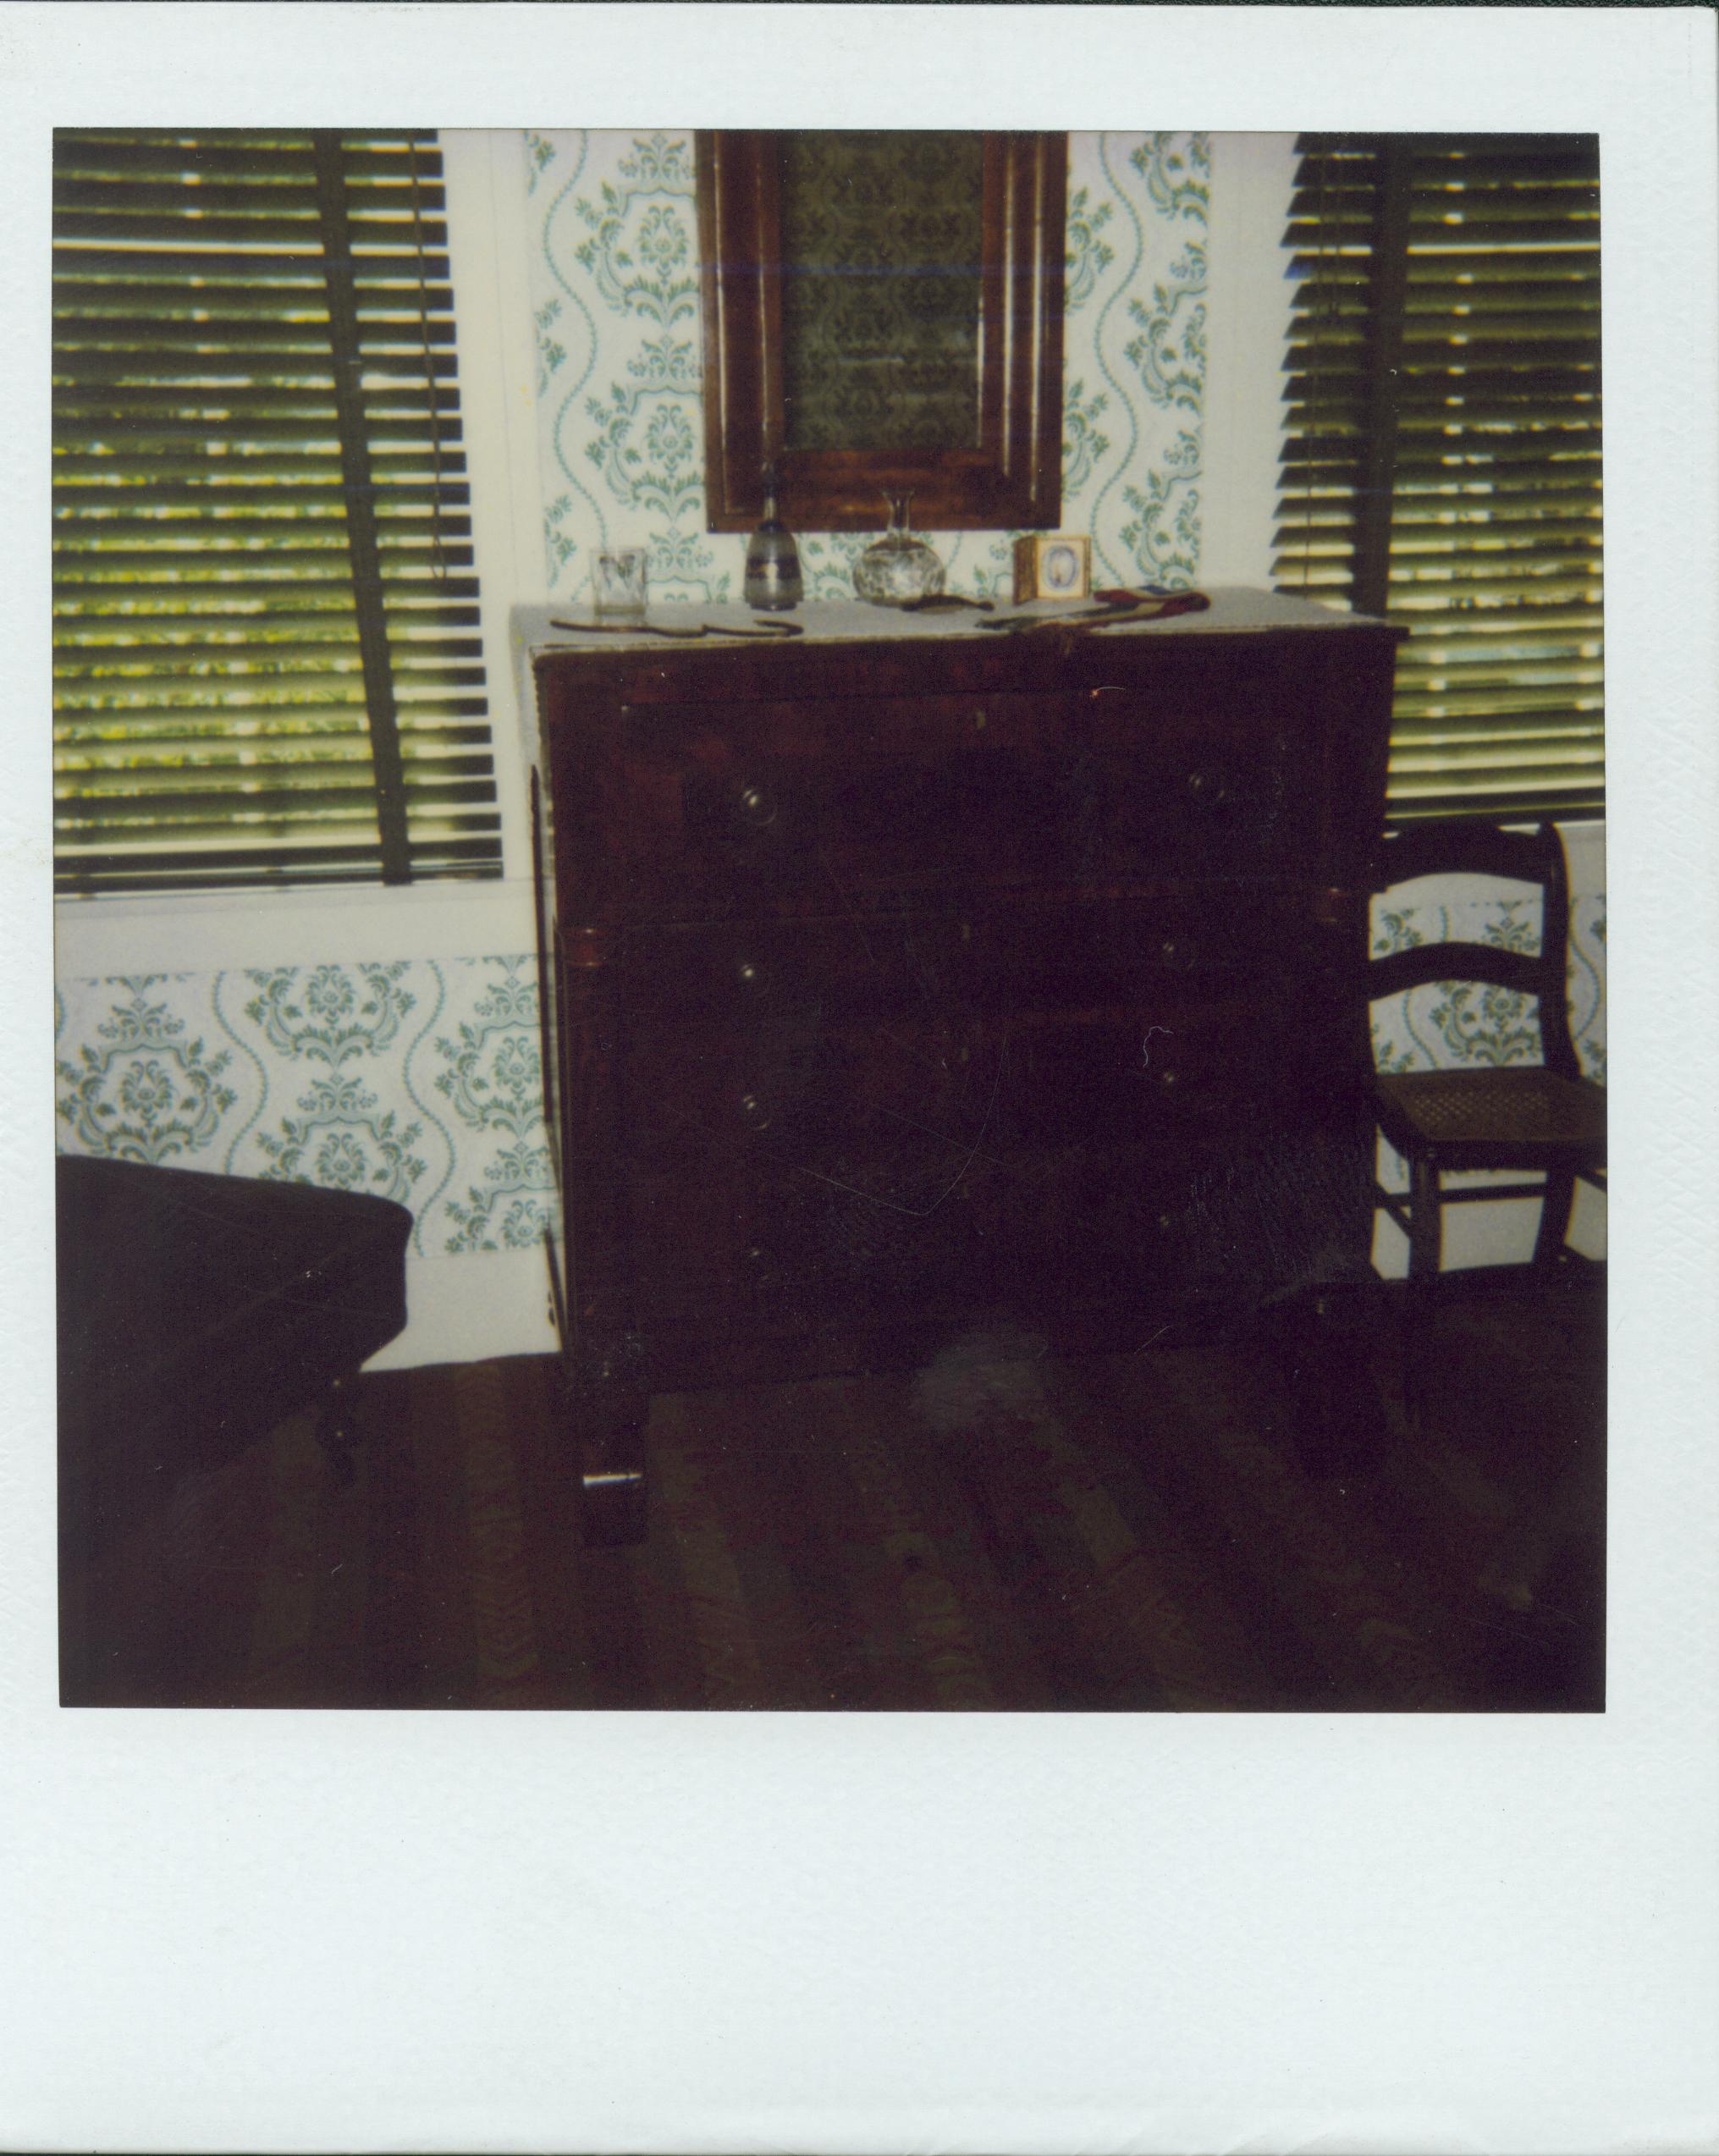 NA Lincoln, Home, artifacts, dresser, chest, drawers